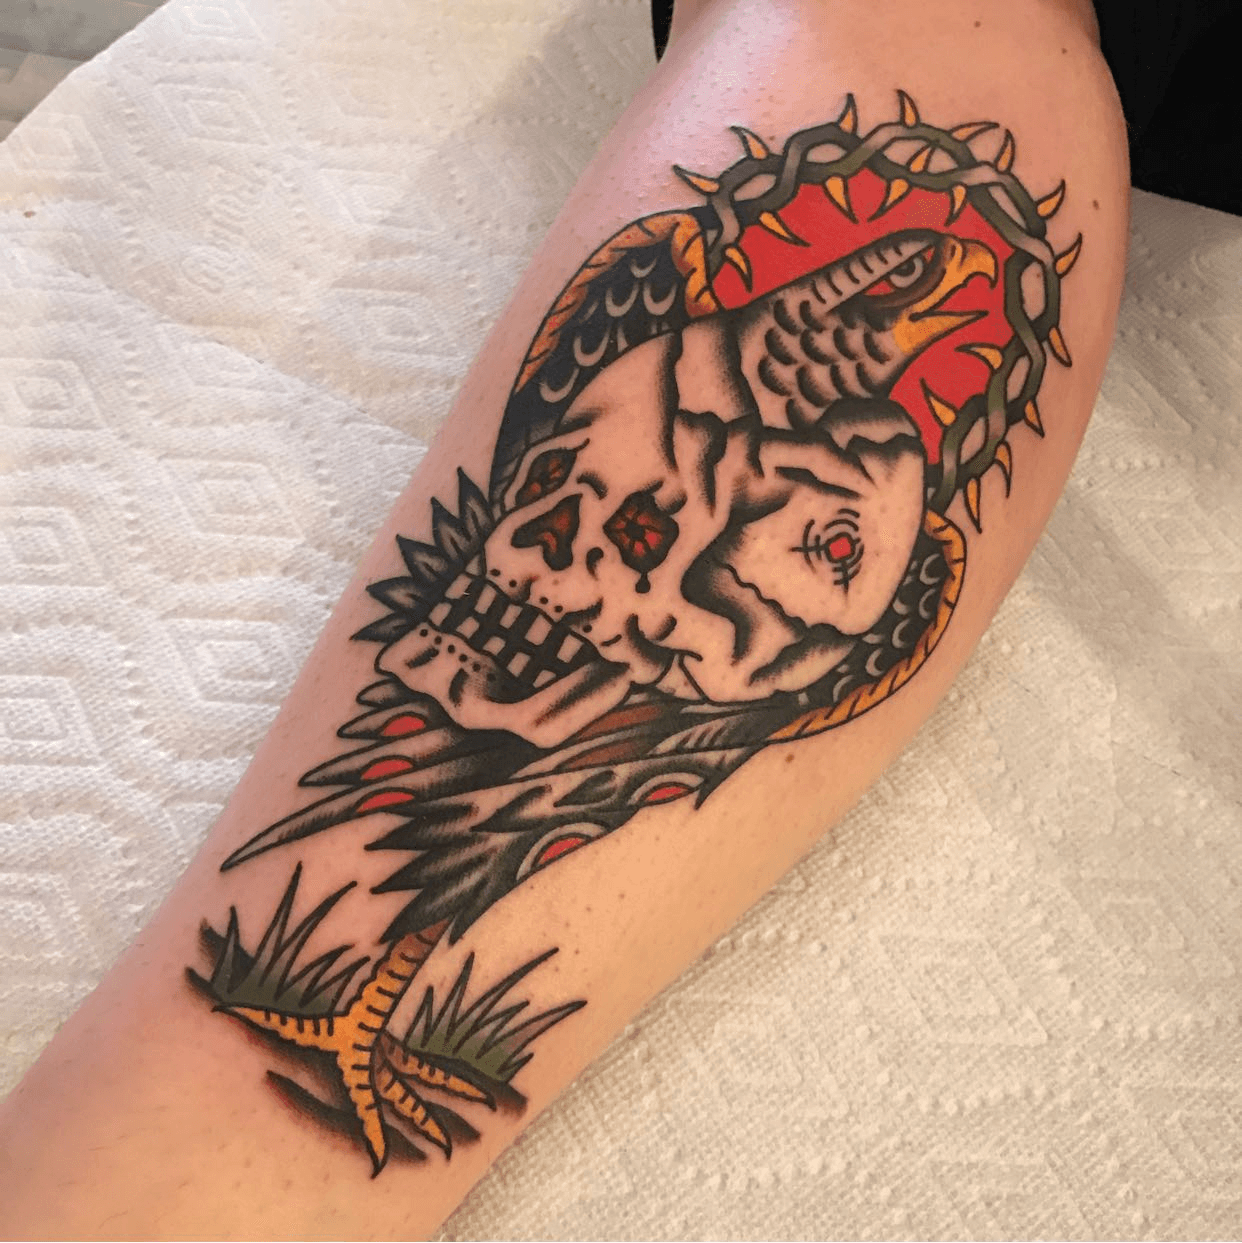 Chris Fernandezs Tattoos Inject History Into Art in NYC  Craft  Tailored